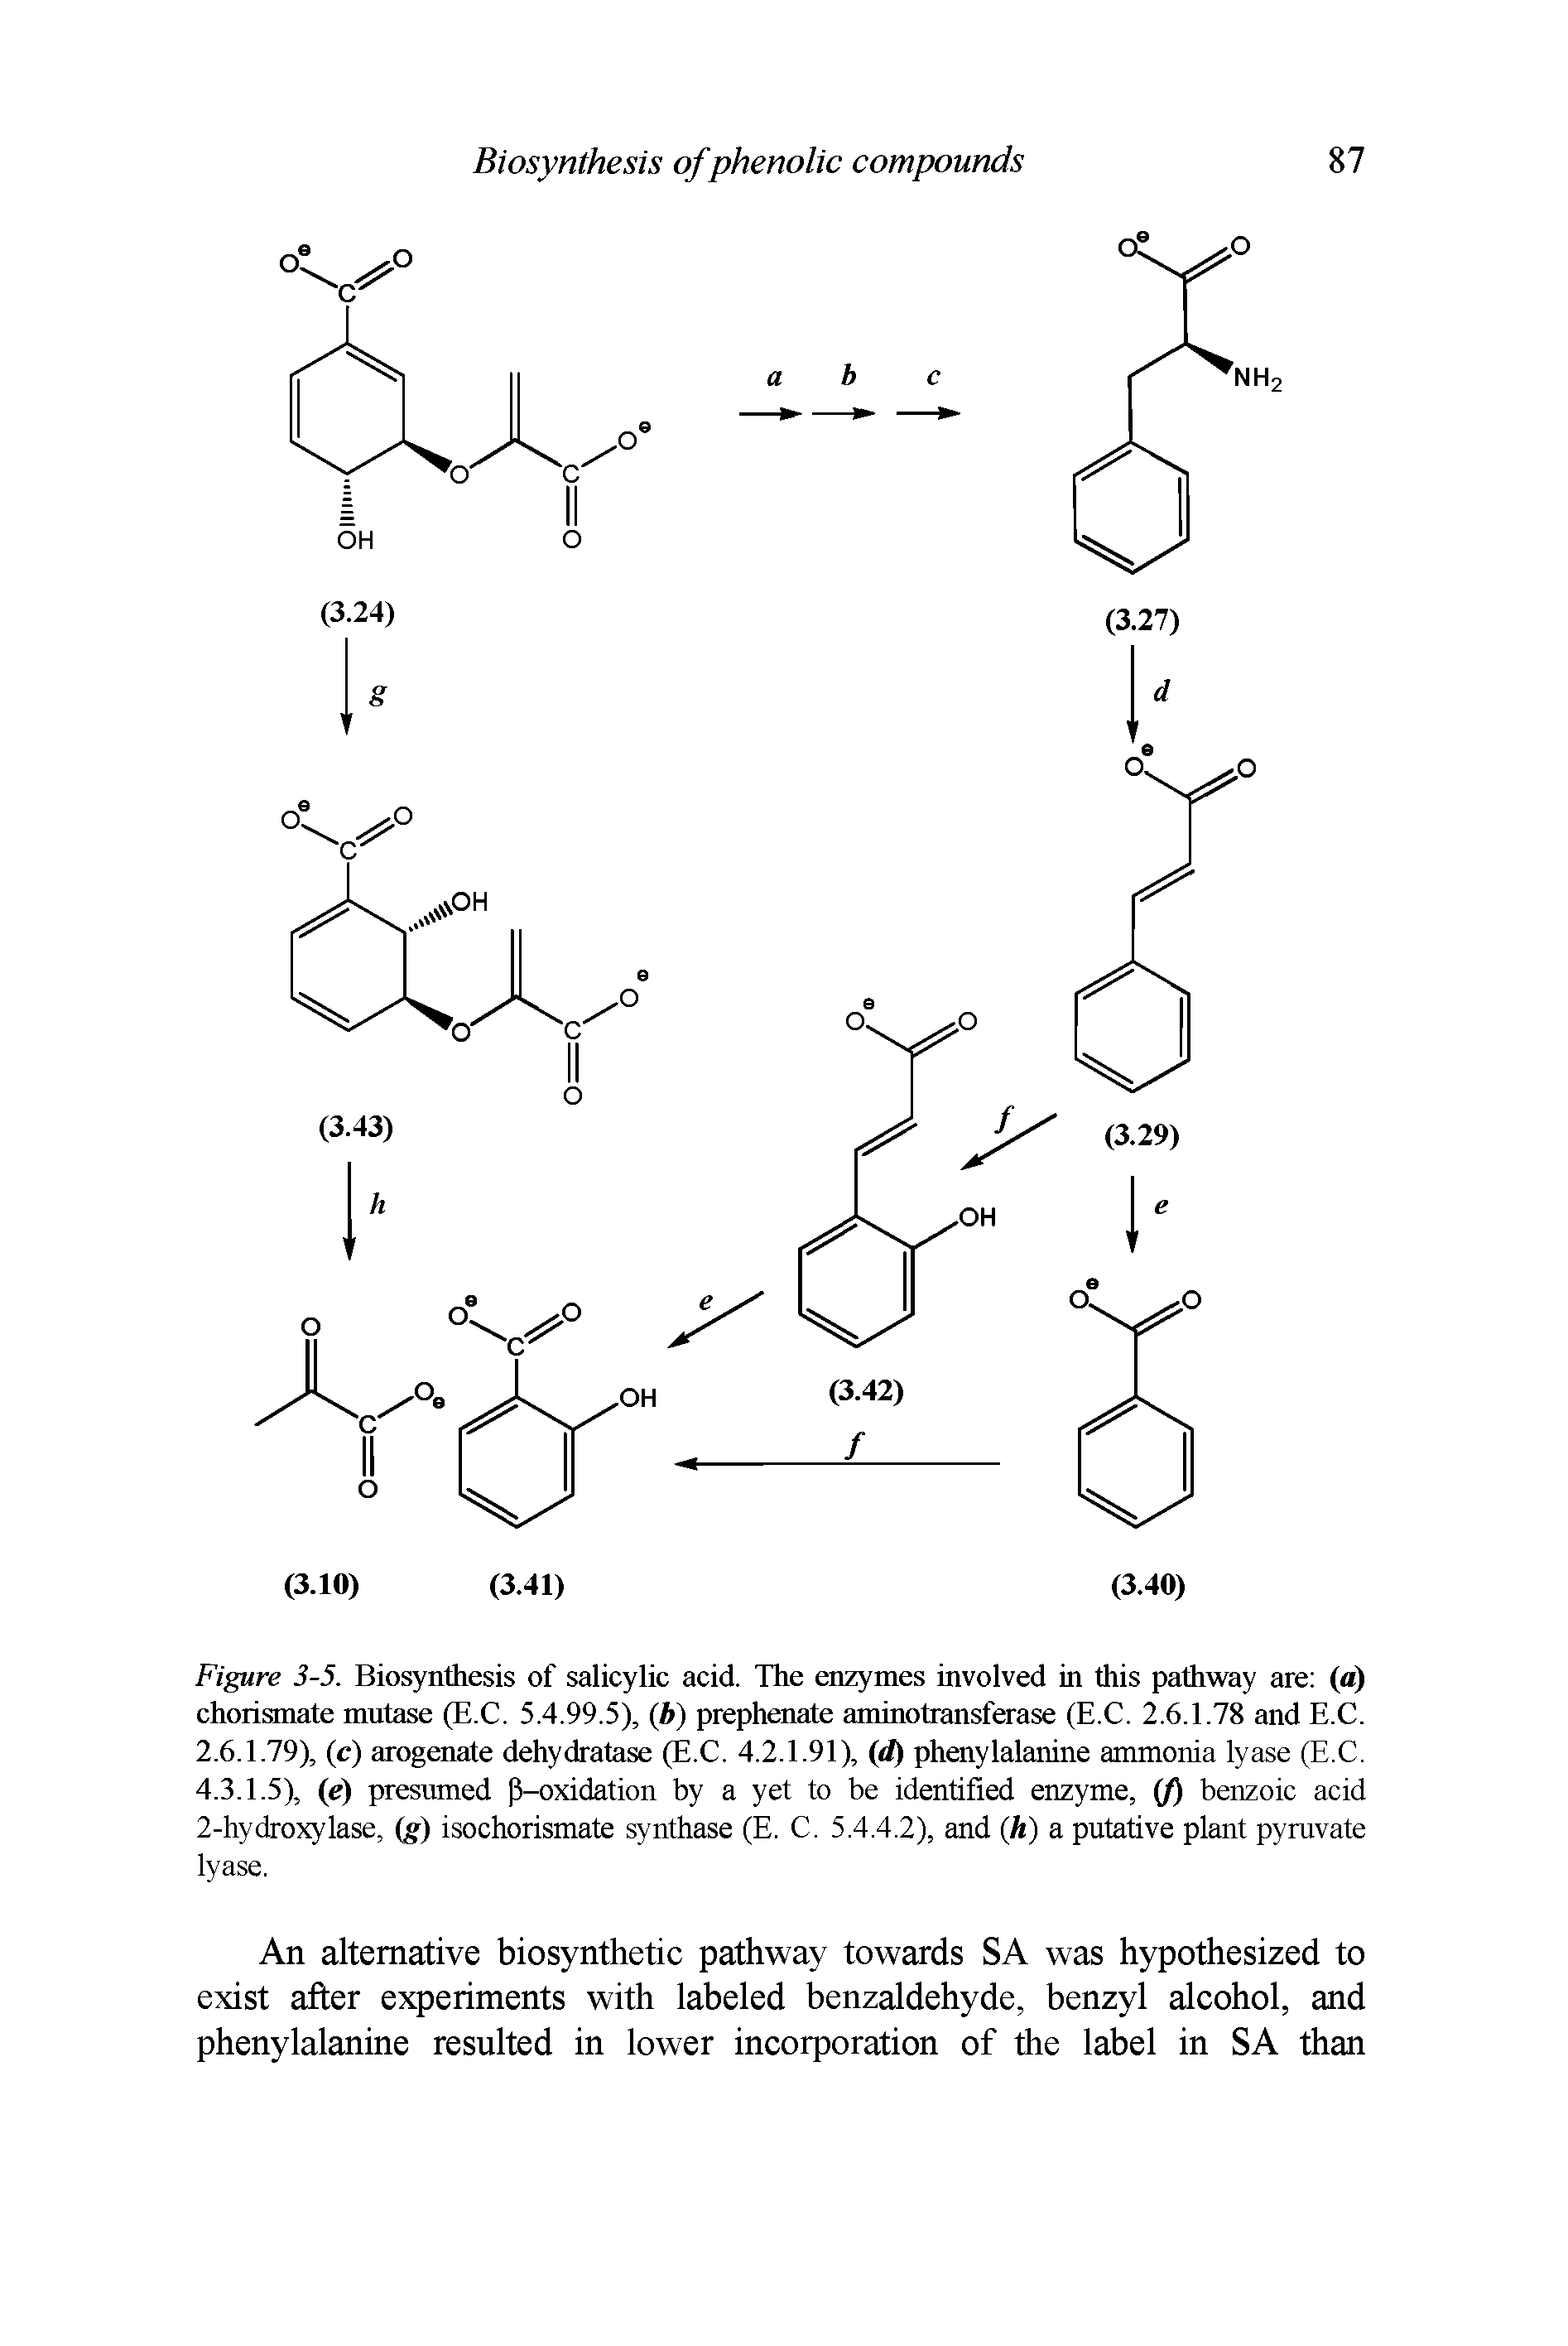 Figure 3-5. Biosynthesis of salicylic acid. The enzymes involved in this pathway are (a) chorismate mutase (E.C. 5.4.99.5), (b) prephenate aminotransferase (E.C. 2.6.1.78 and E.C. 2.6.1.79), (c) arogenate dehydratase (E.C. 4.2.1.91), (d) phenylalanine ammonia lyase (E.C. 4.3.1.5), (e) presumed P-oxidation by a yet to be identified enzyme, (f) benzoic acid 2-hydroxylase, (g) isochorismate synthase (E. C. 5.4.4.2), and (h) a putative plant pyruvate lyase.